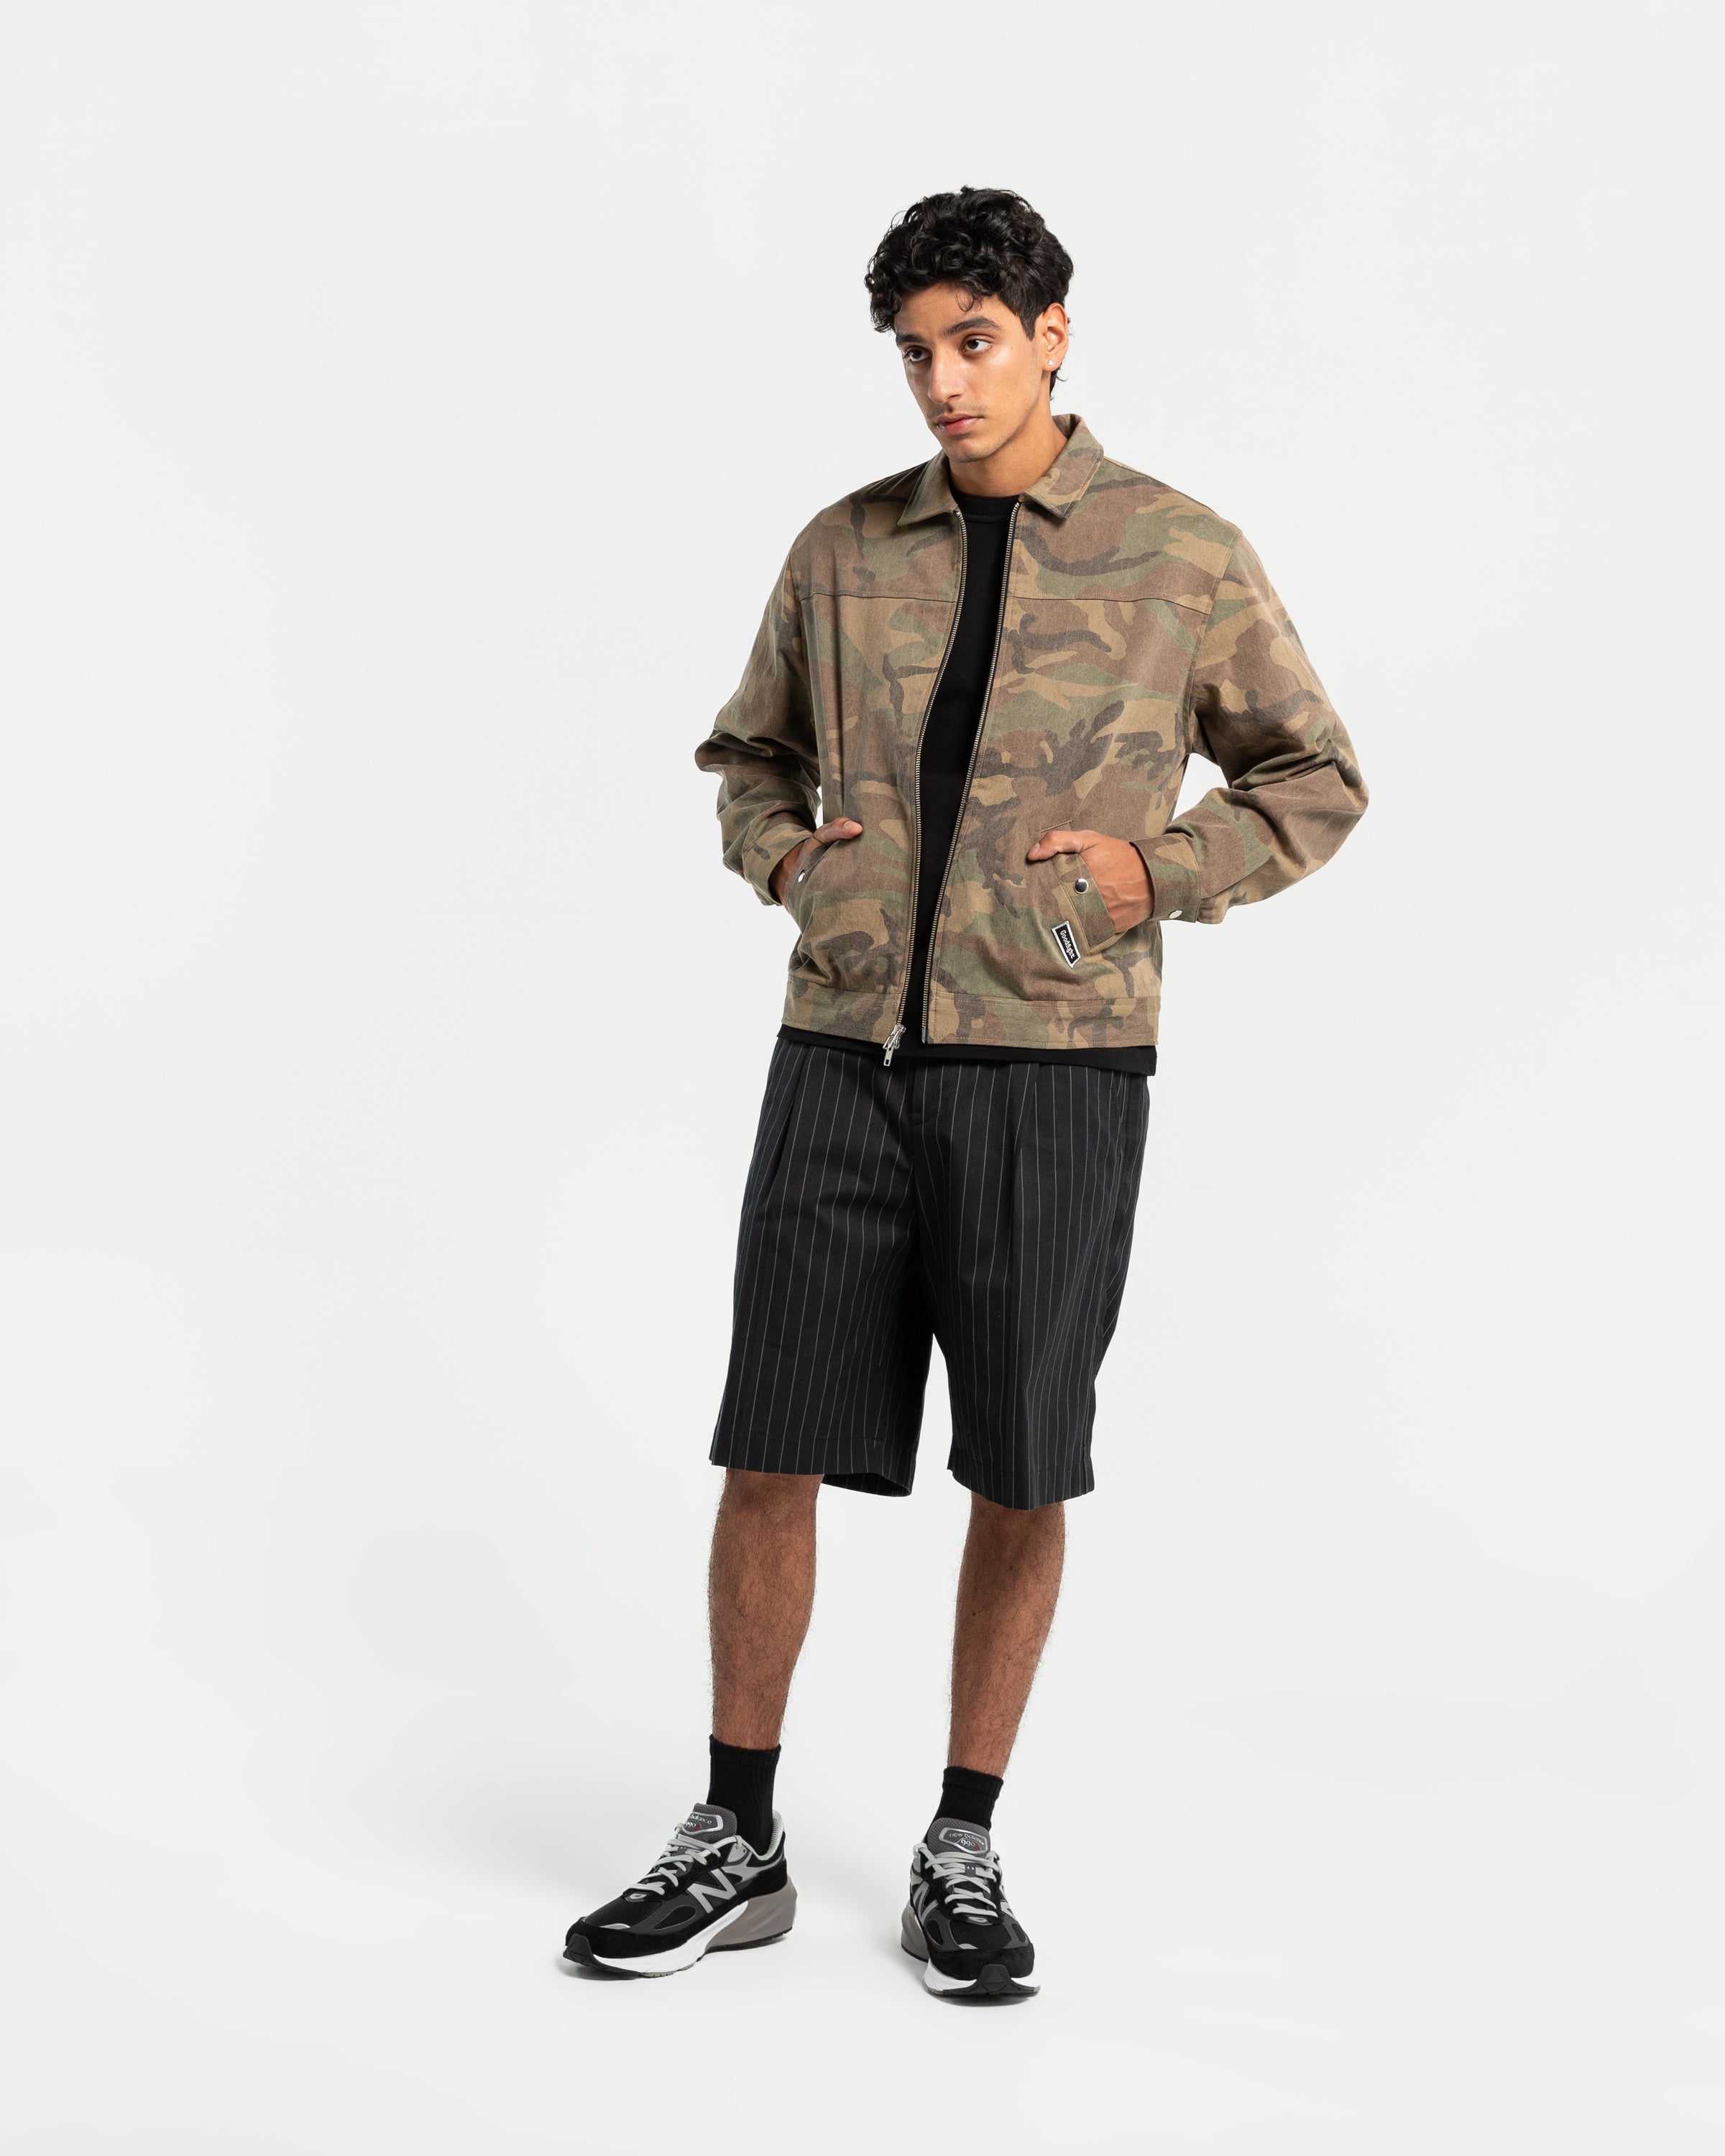 Reflection Jacket in Selvedge in Military Camo